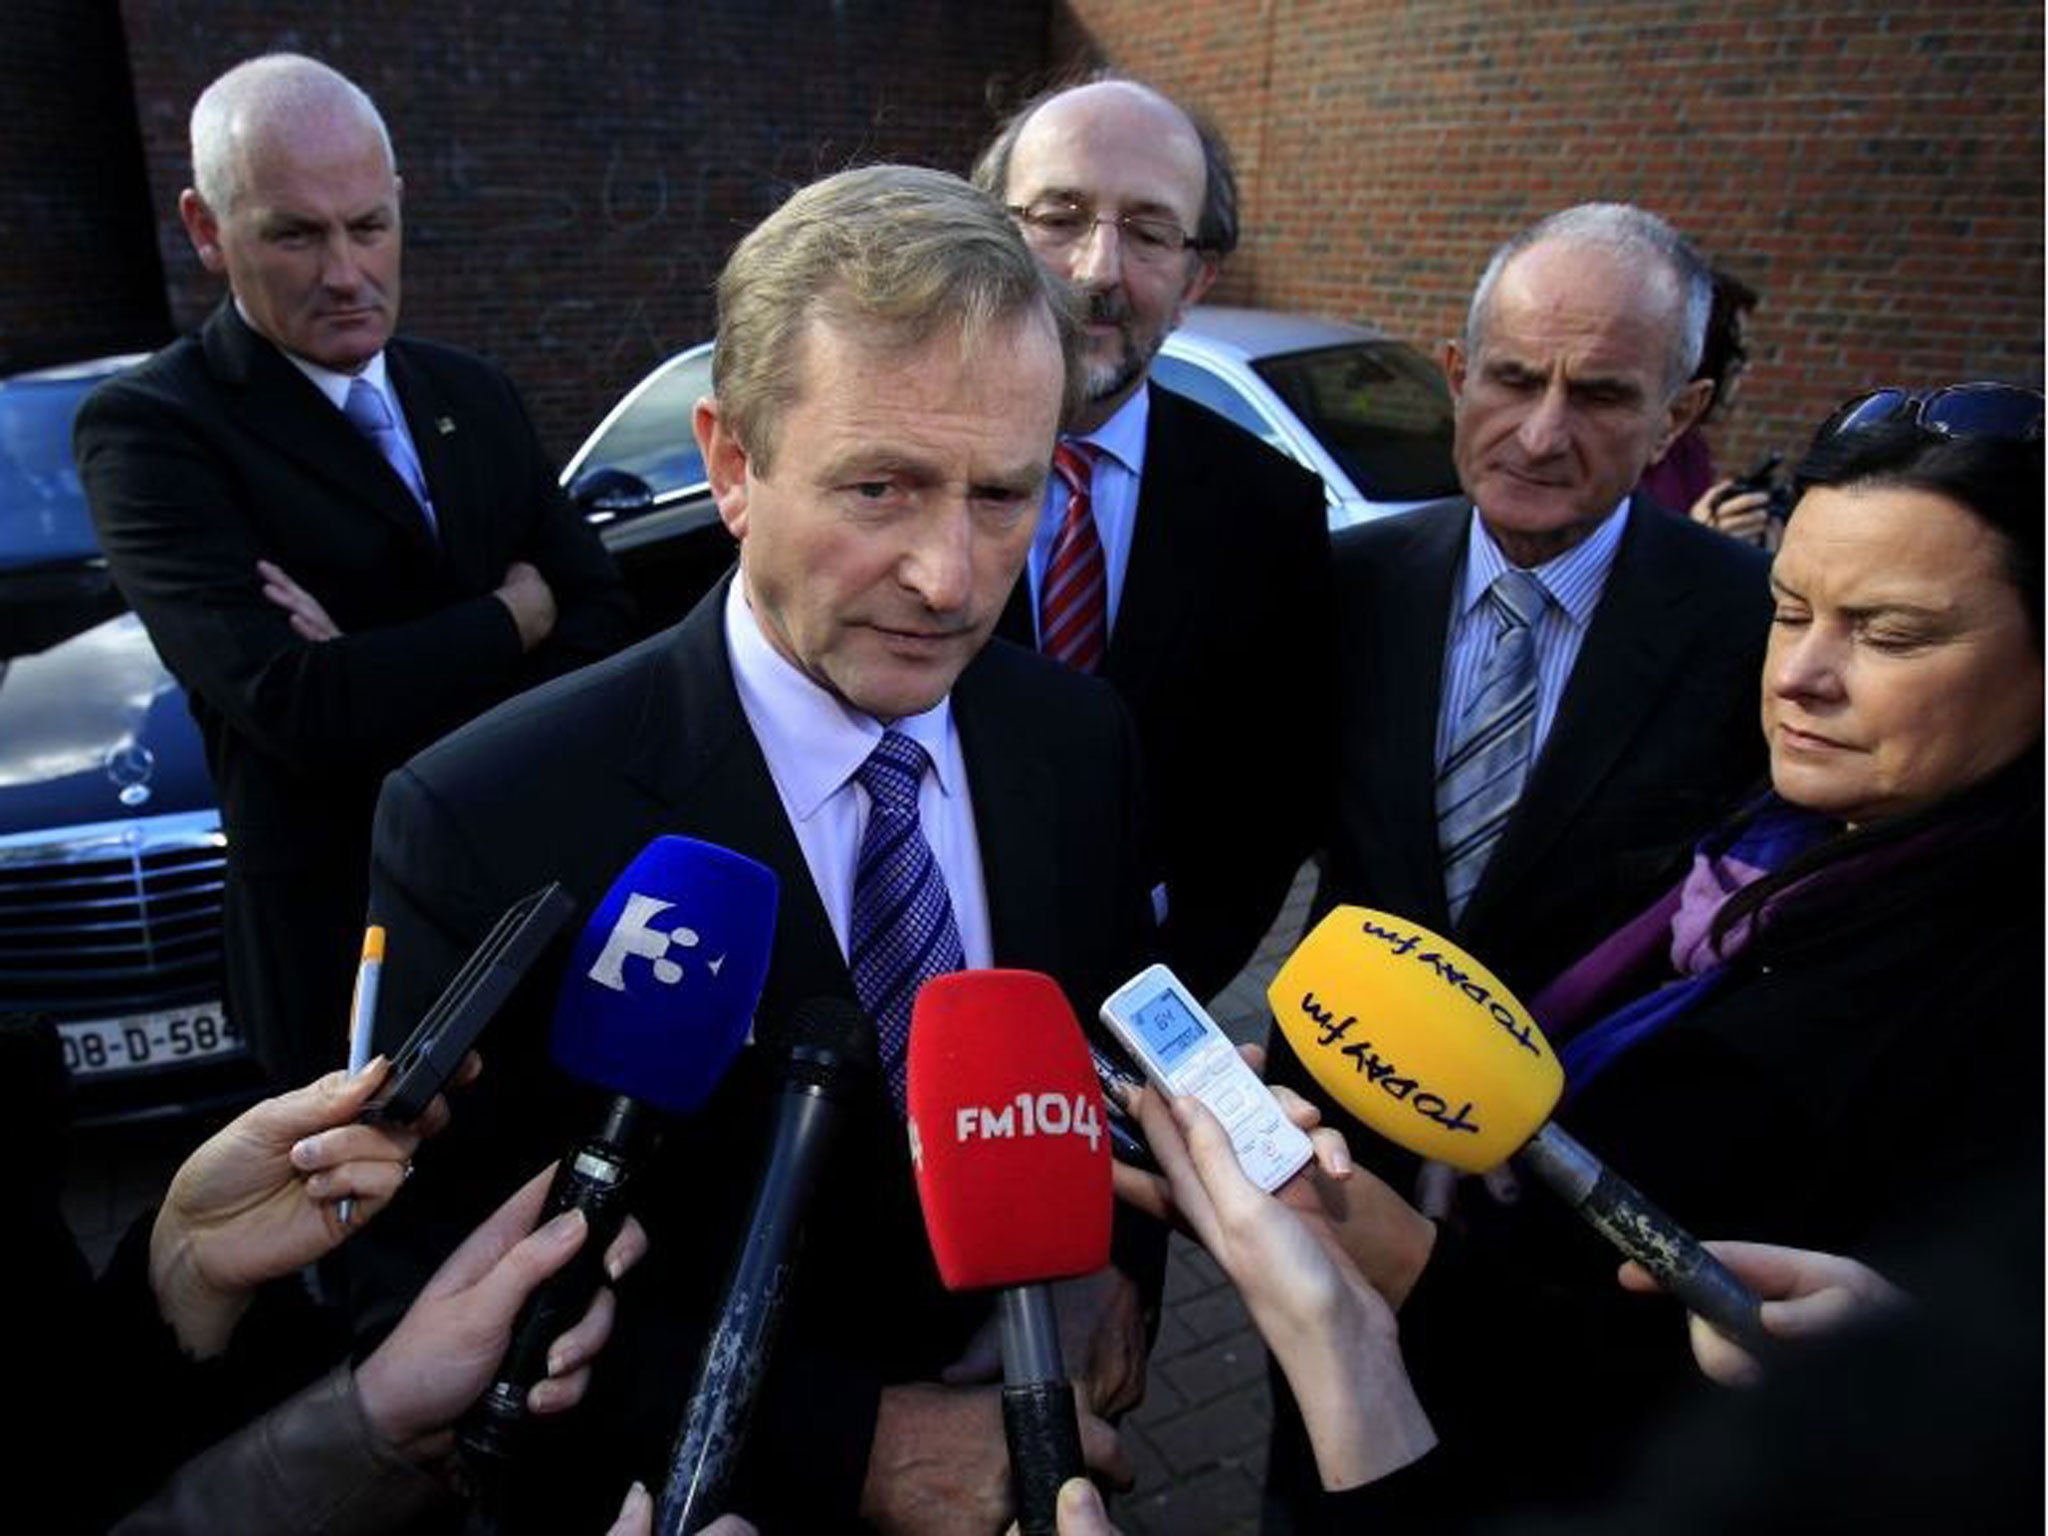 Taoiseach Enda Kenny speaks to members of the media. He has confirmed that Ireland will exit its strict bailout programme by the end of the year